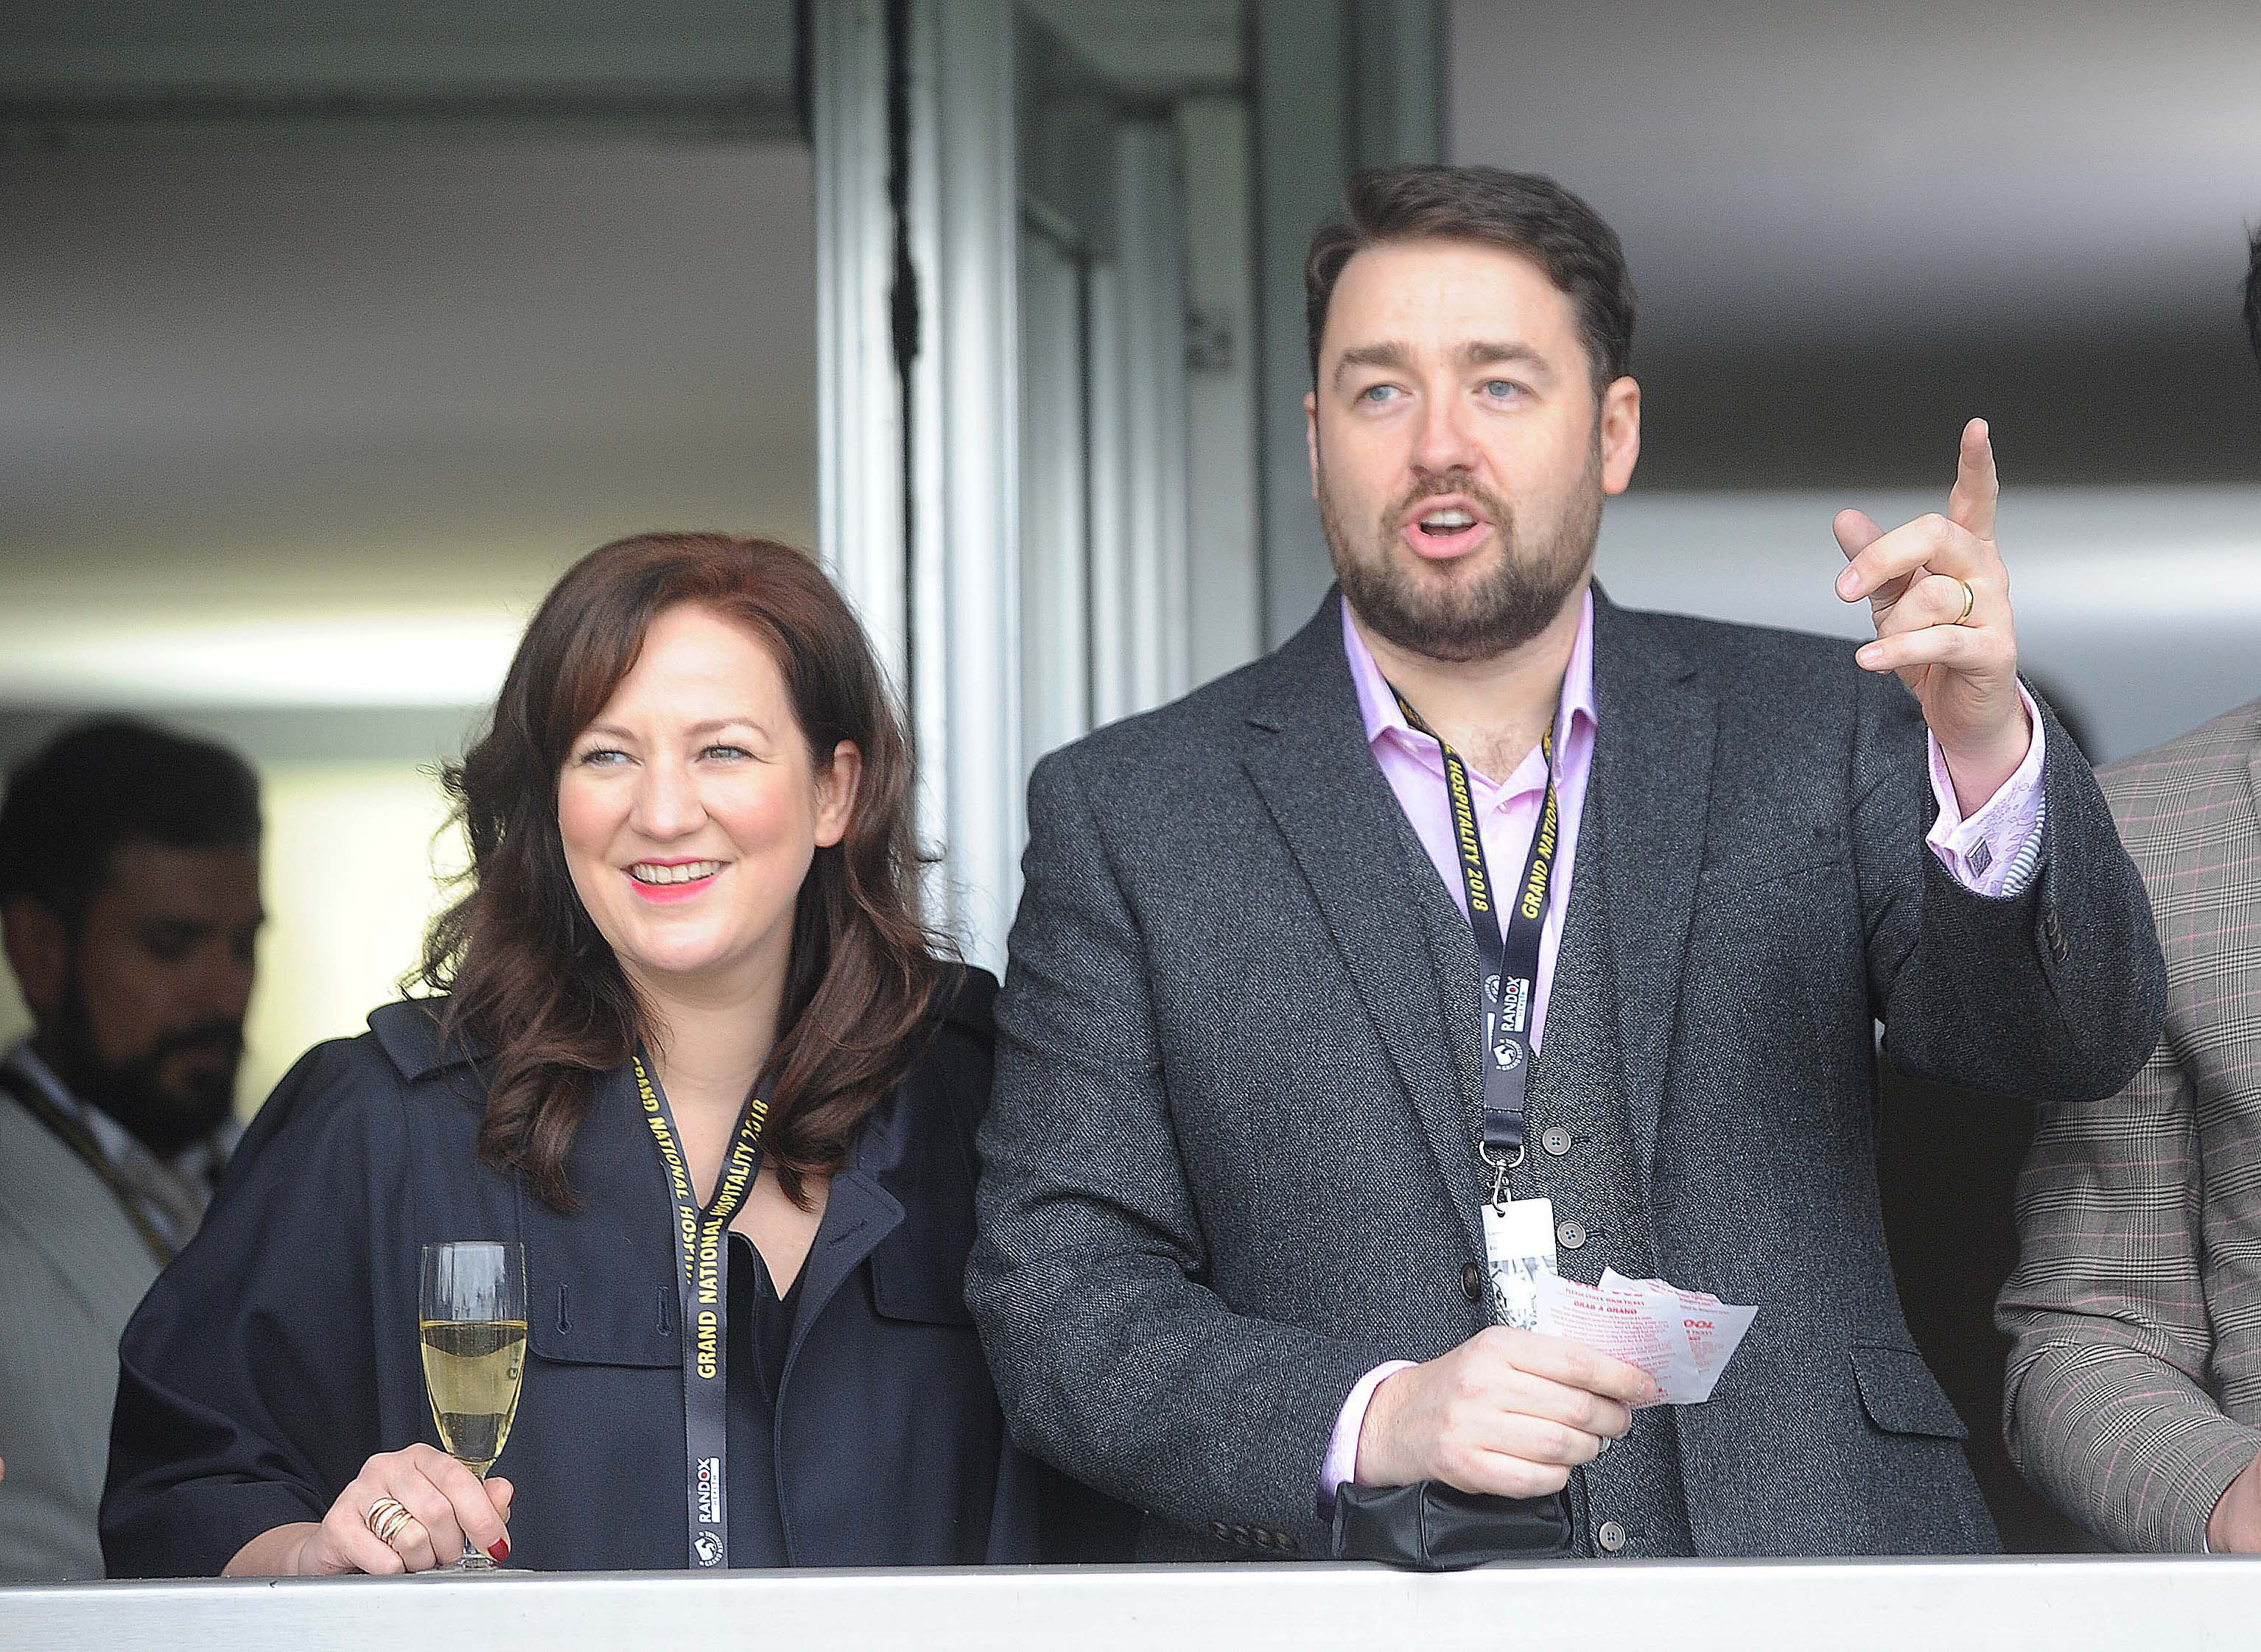  Jason and his wife Lucy enjoying Ladies' Day at Aintree in 2018